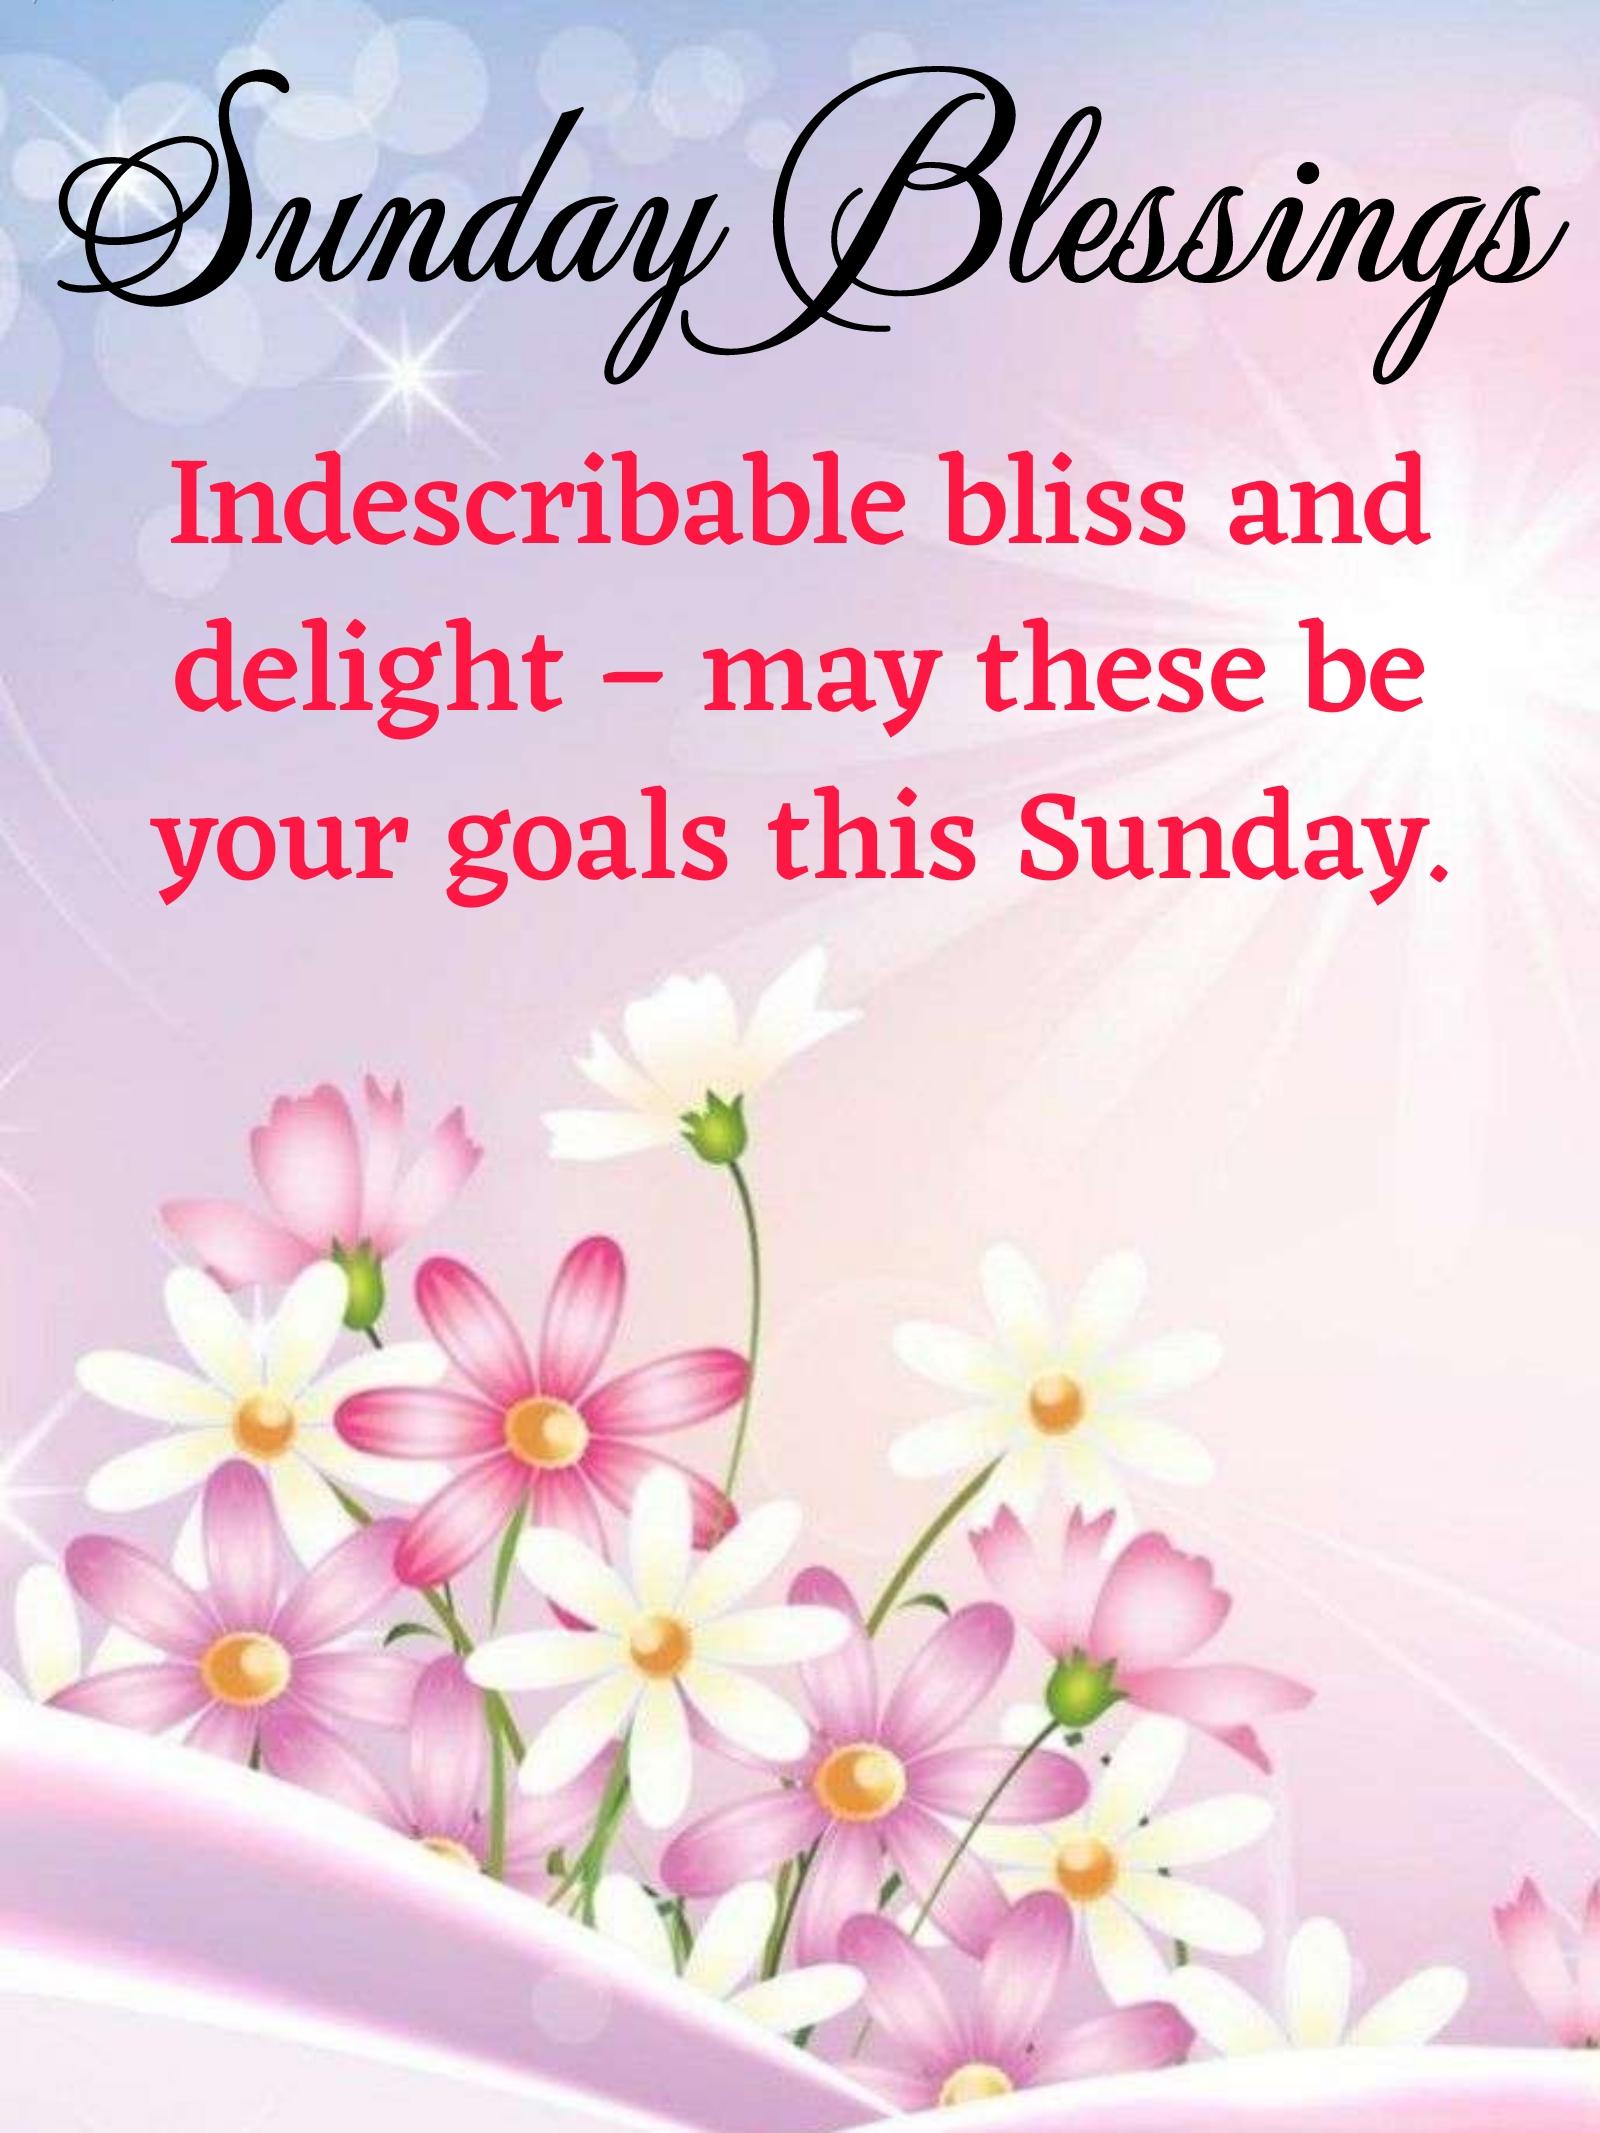 Indescribable bliss and delight May these be your goals this Sunday